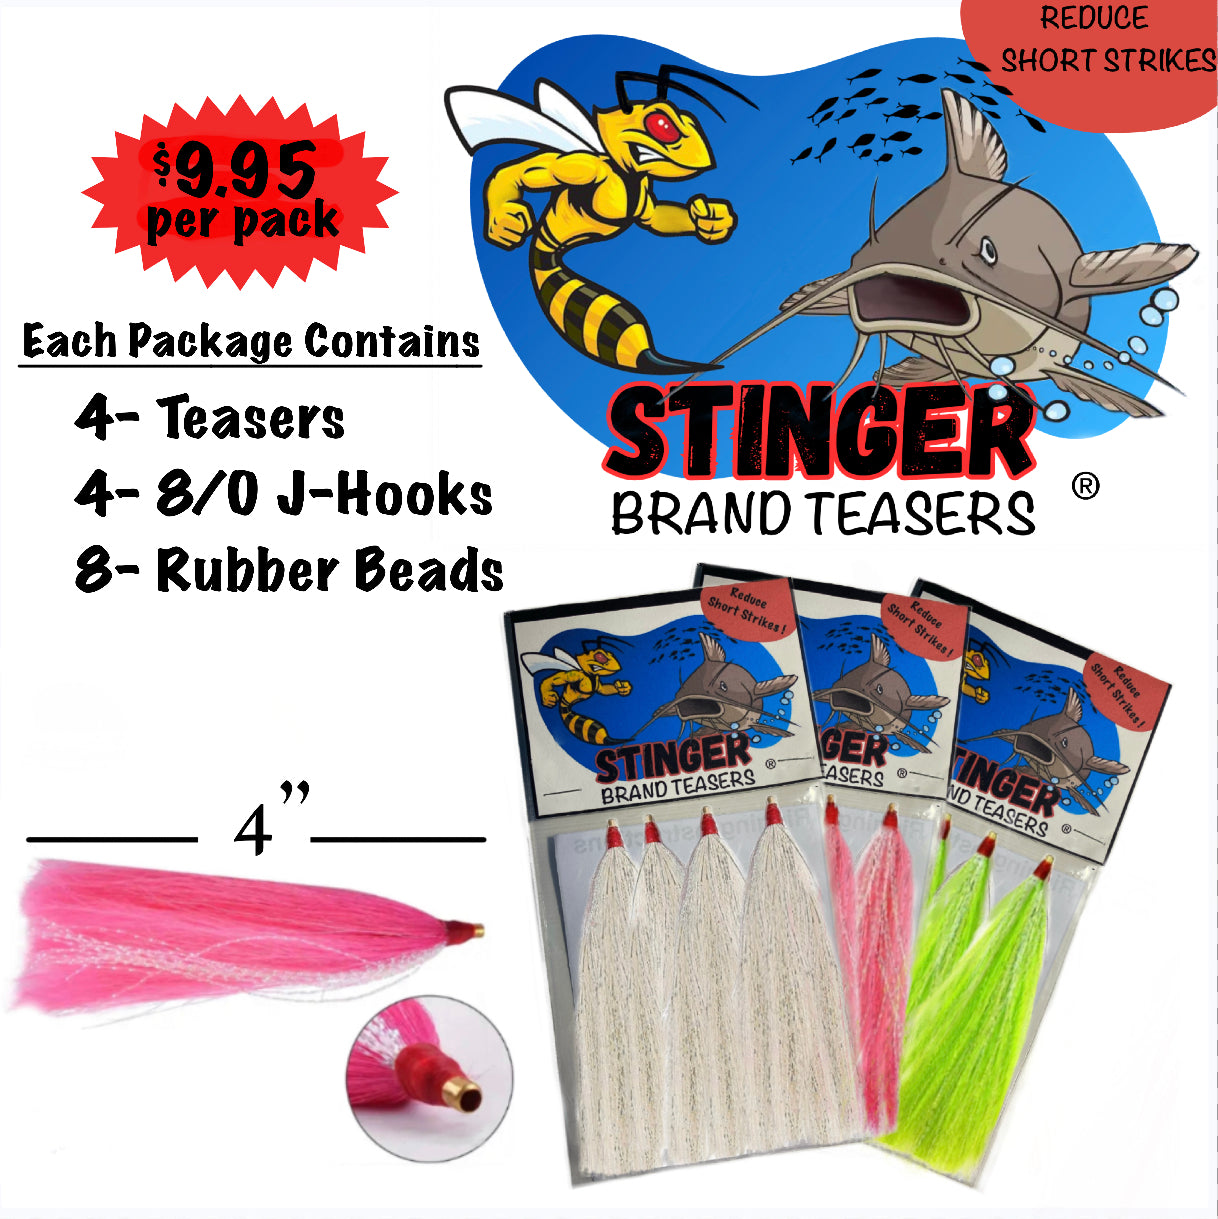 Stinger brand teasers – Cat Call Tackle